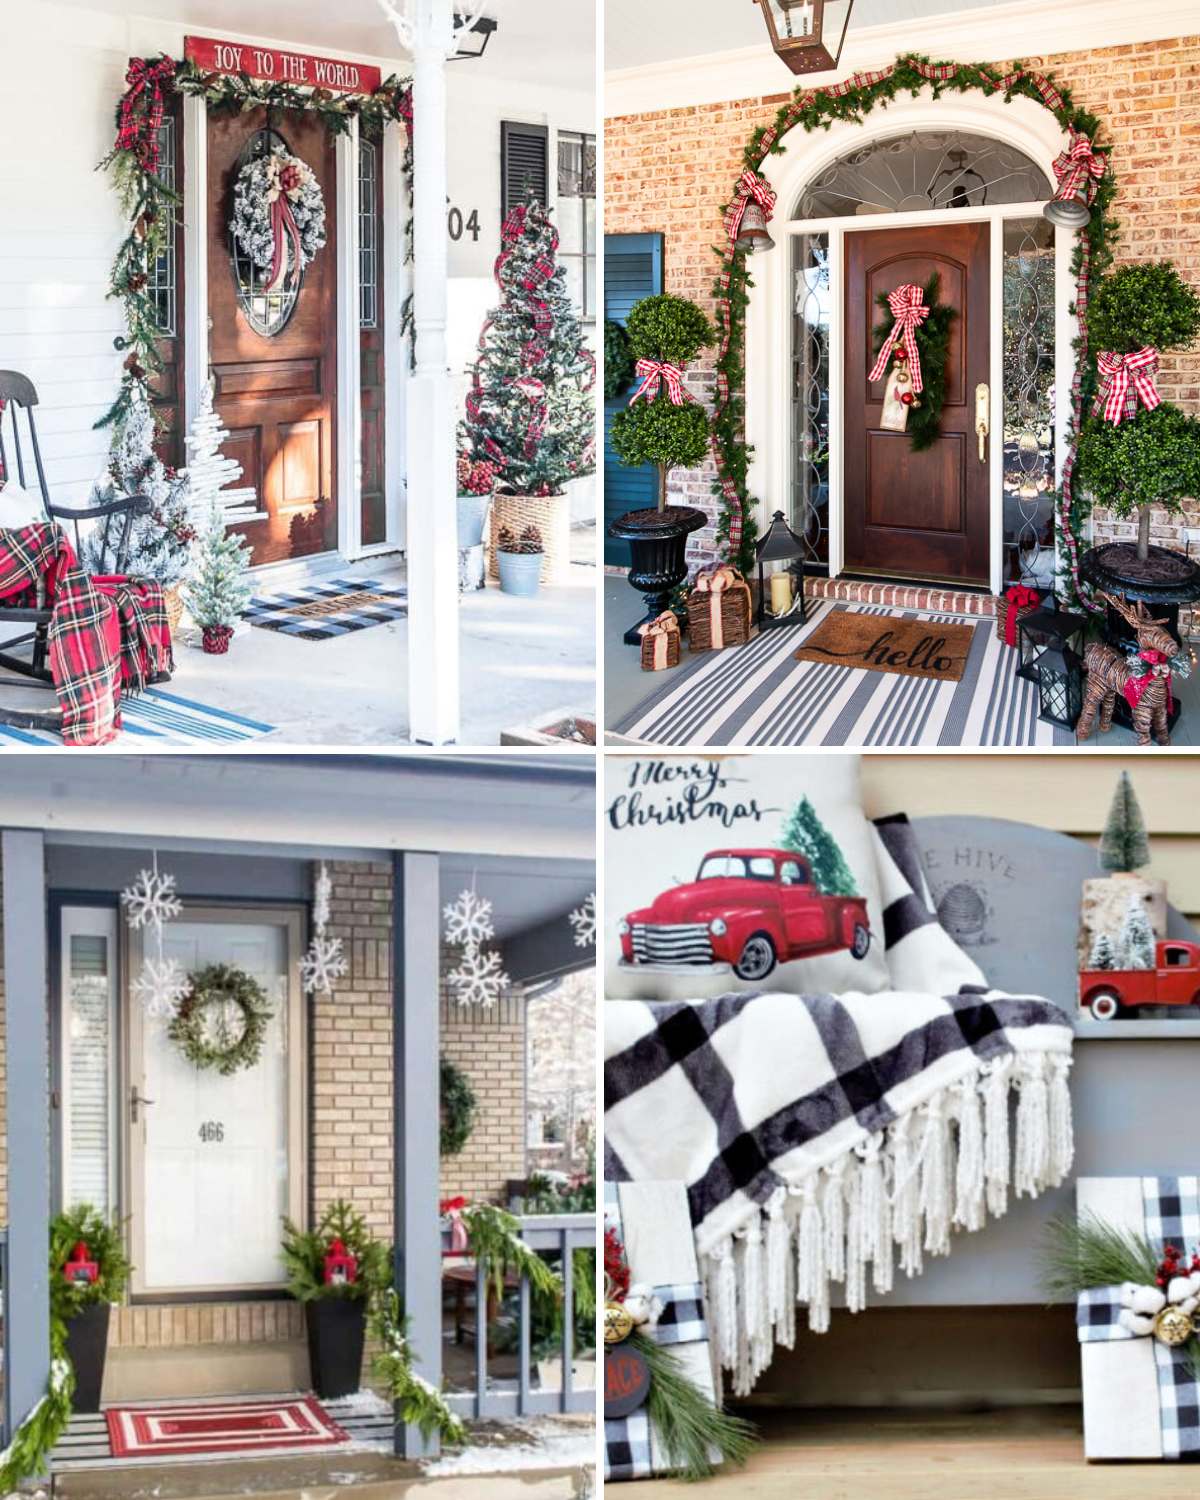 23 Swoon-Worthy Christmas Porch Decorations To Inspire